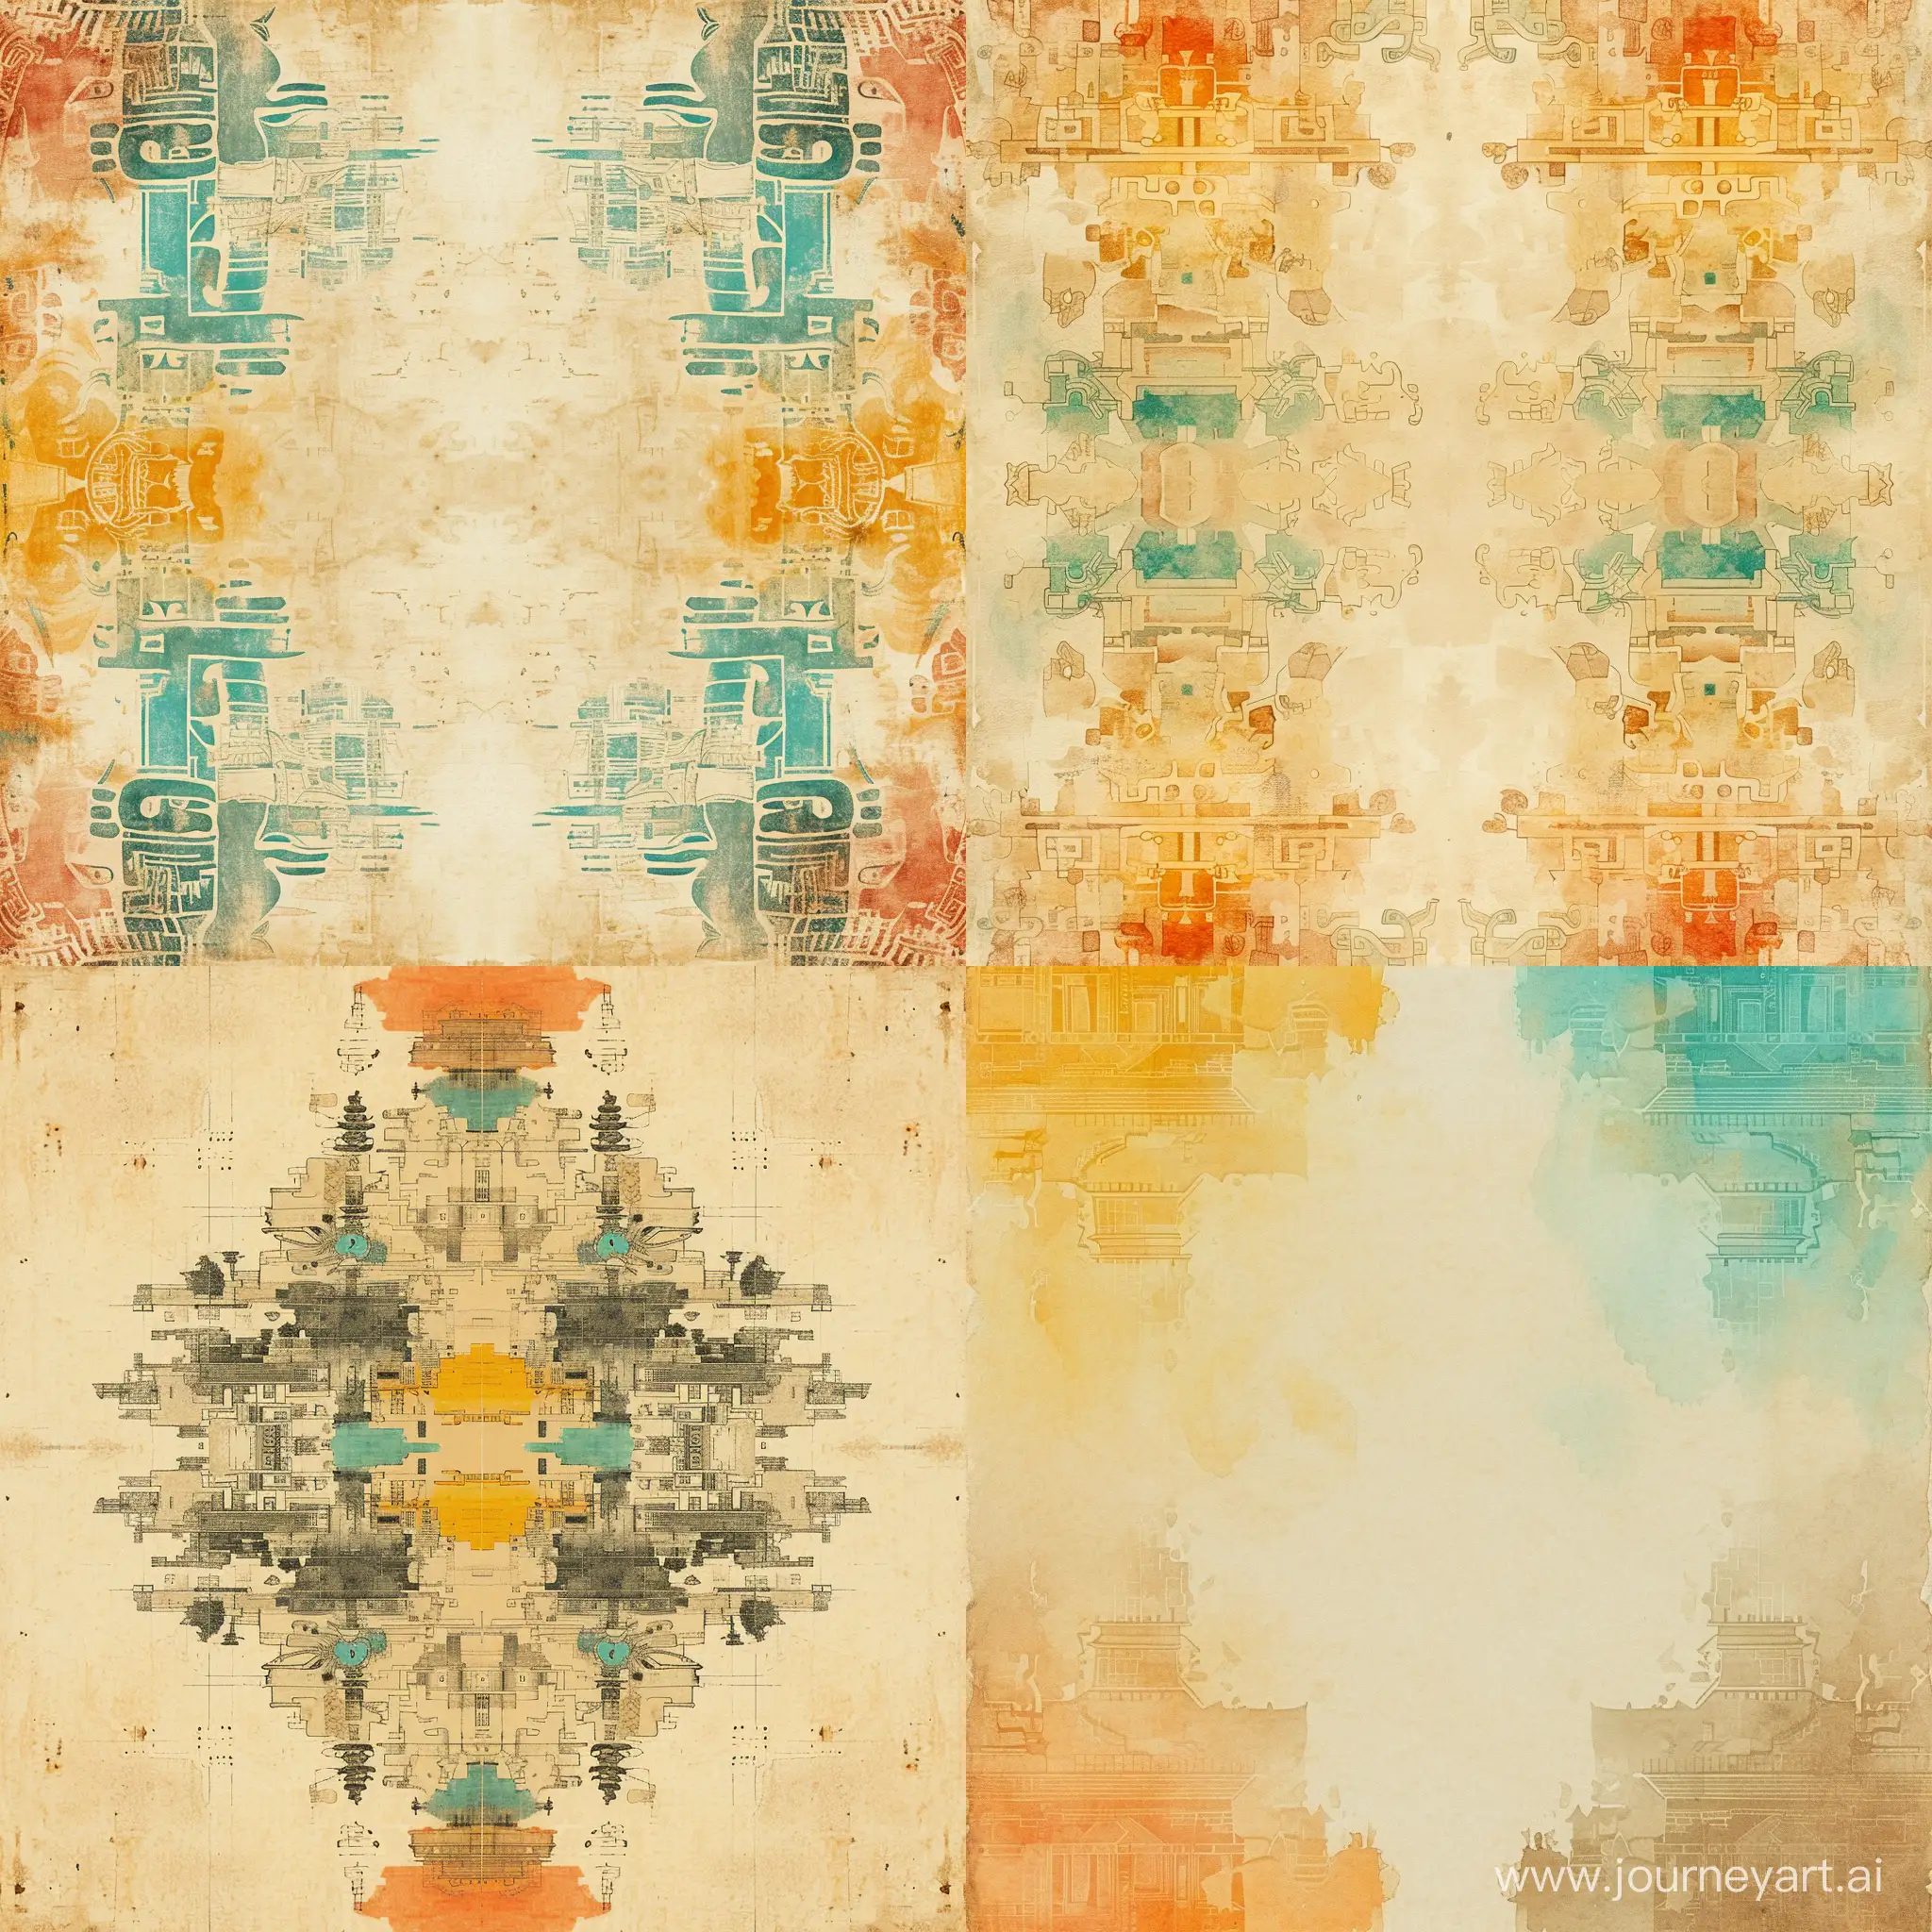 Symmetrical-Antique-Paper-with-Ancient-City-Elements-in-Chinese-Aztec-and-Roman-Styles